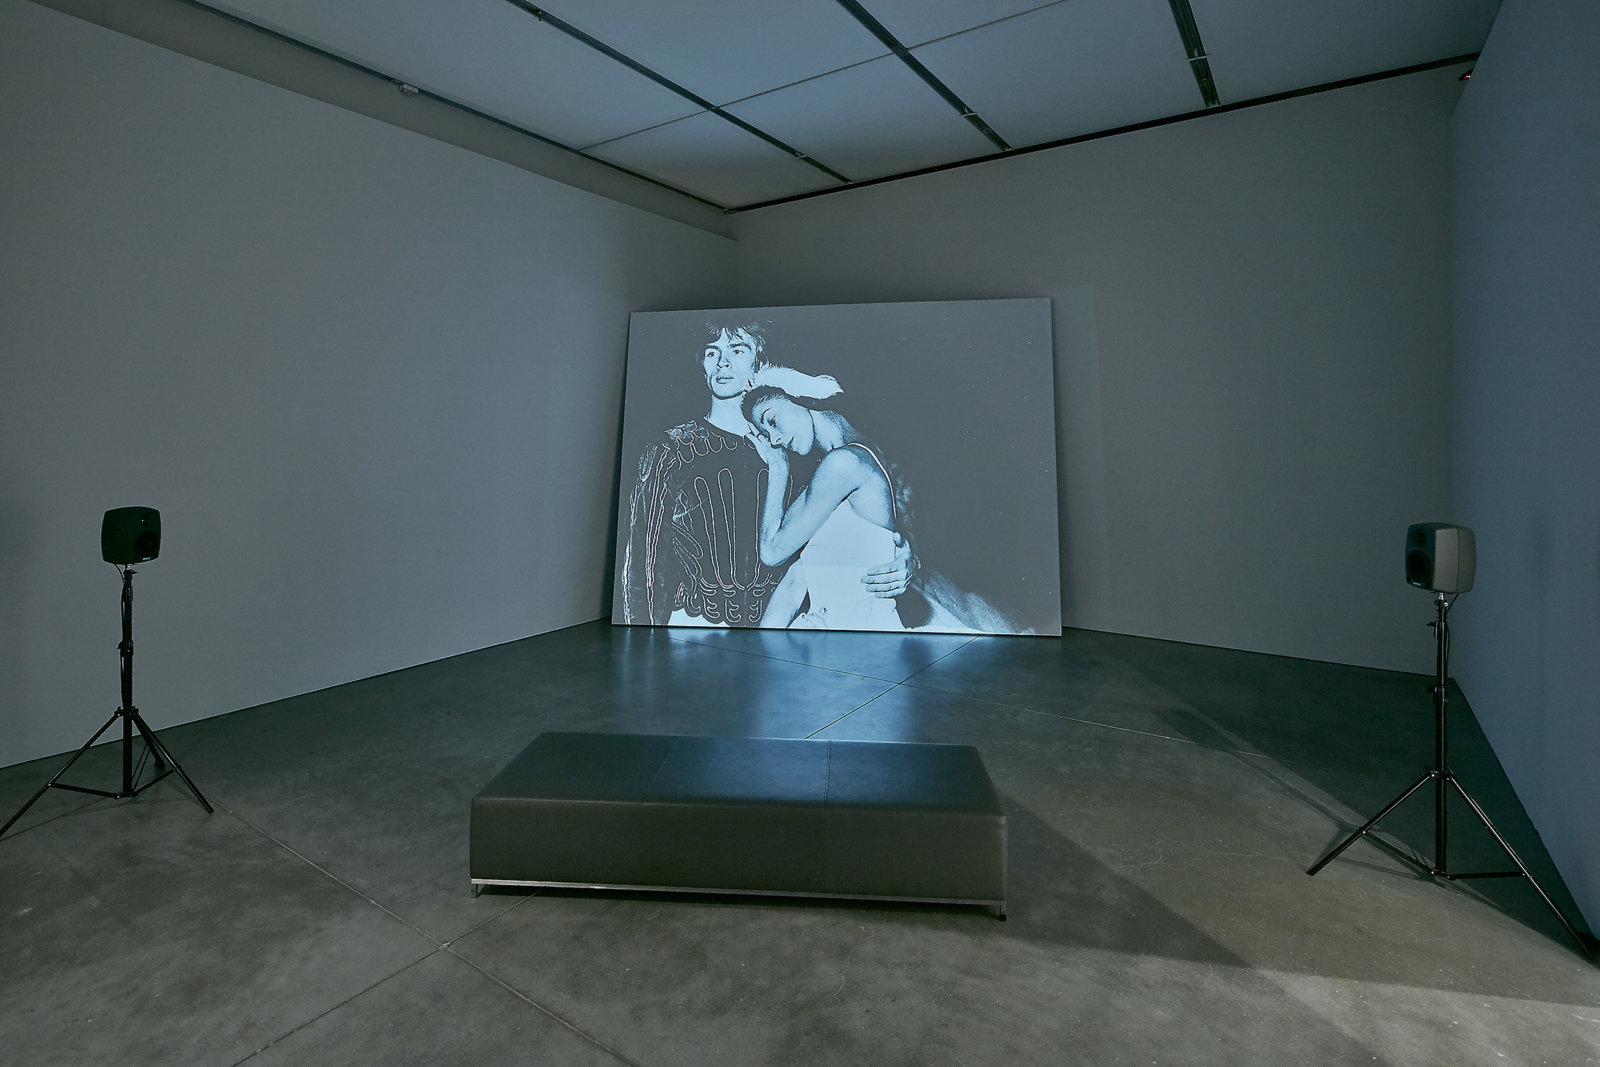 Geoffrey Farmer, Look in my face; my name is Might-have-been; I am also called No-more, Too-late, Farewell, 2010–2014, computer-generated algorithmic montage sequence, dimensions variable. Installation view, Institute of Contemporary Art, Boston, 2016